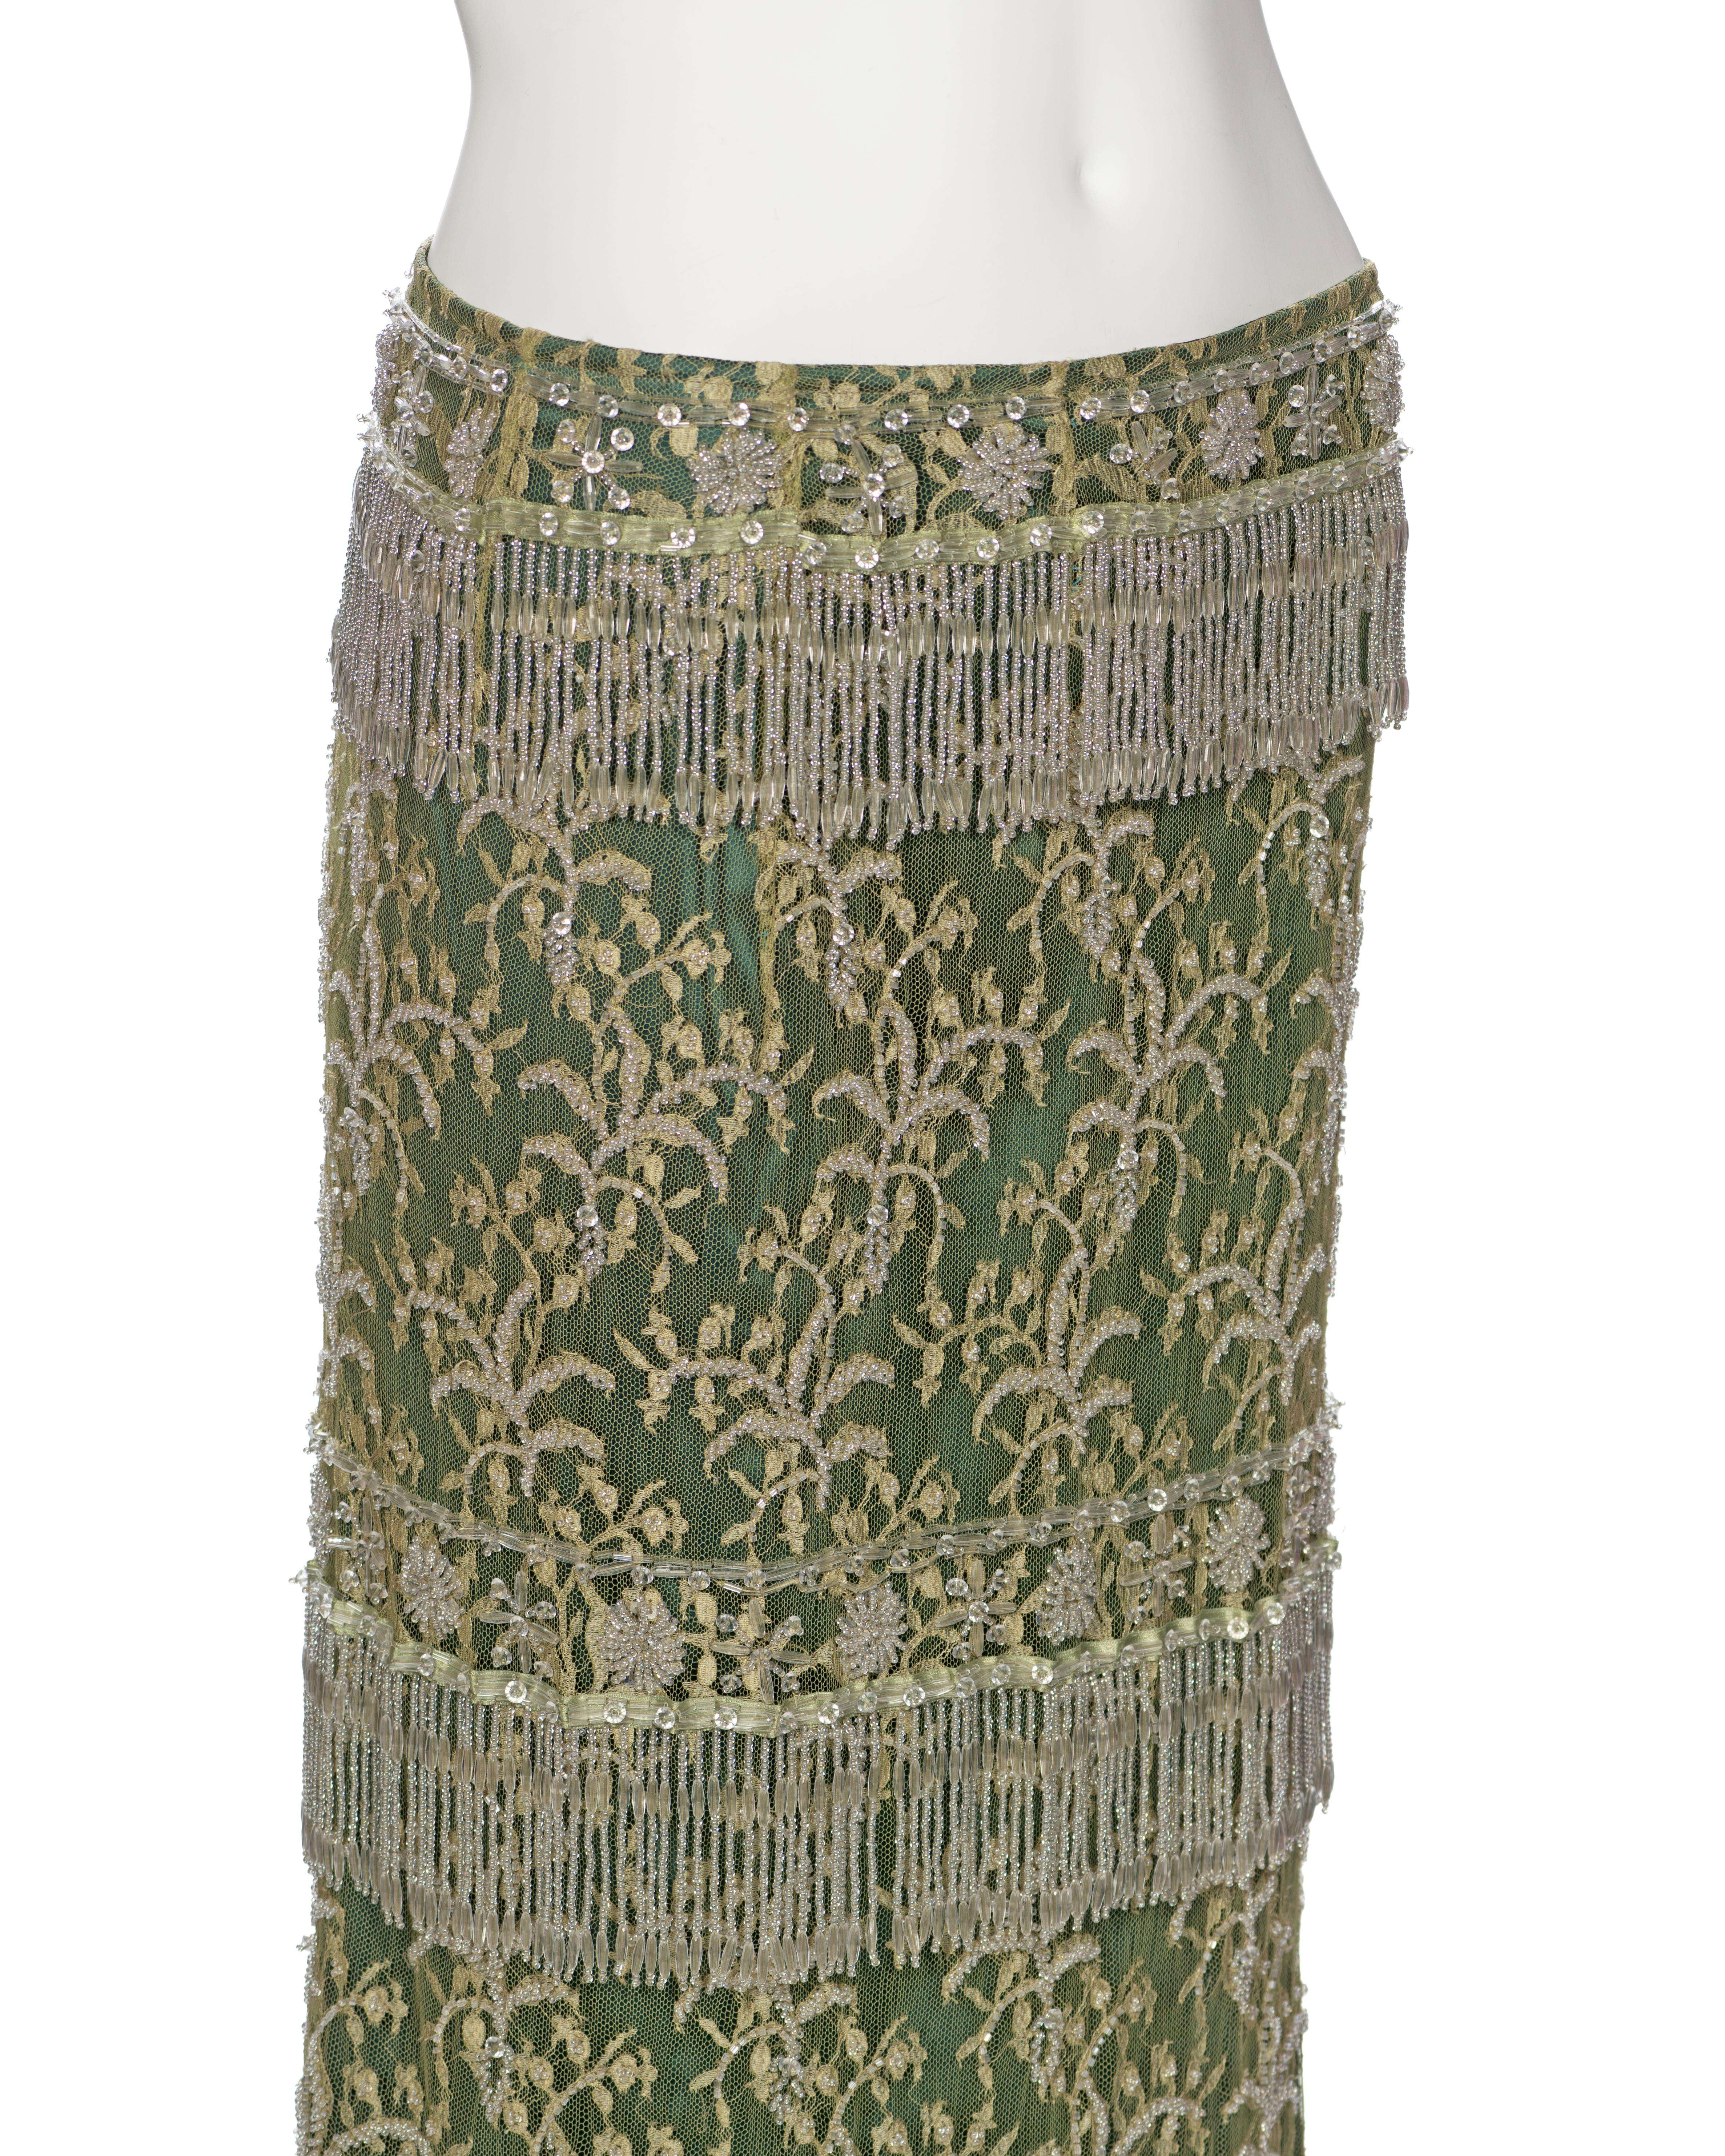 Dolce & Gabbana Beaded Chartreuse Lace Evening Skirt, ss 2000 For Sale 6